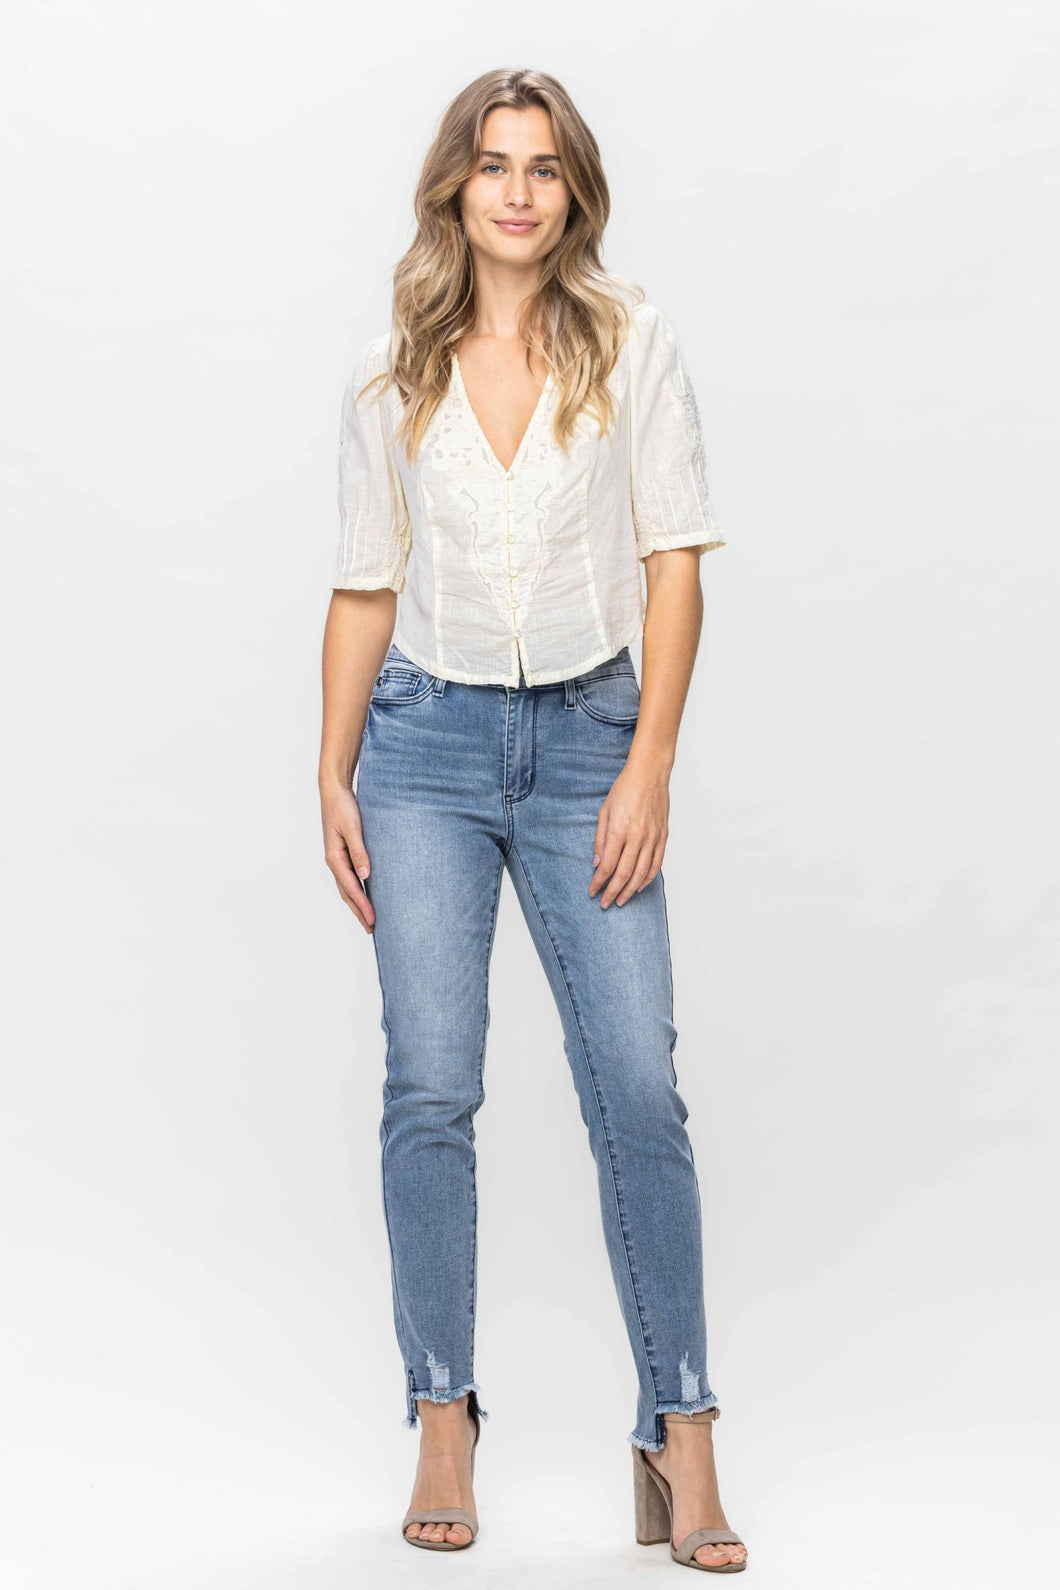 Keep Your Cool Sustainable Relaxed Fit Cool Denim Judy Blue